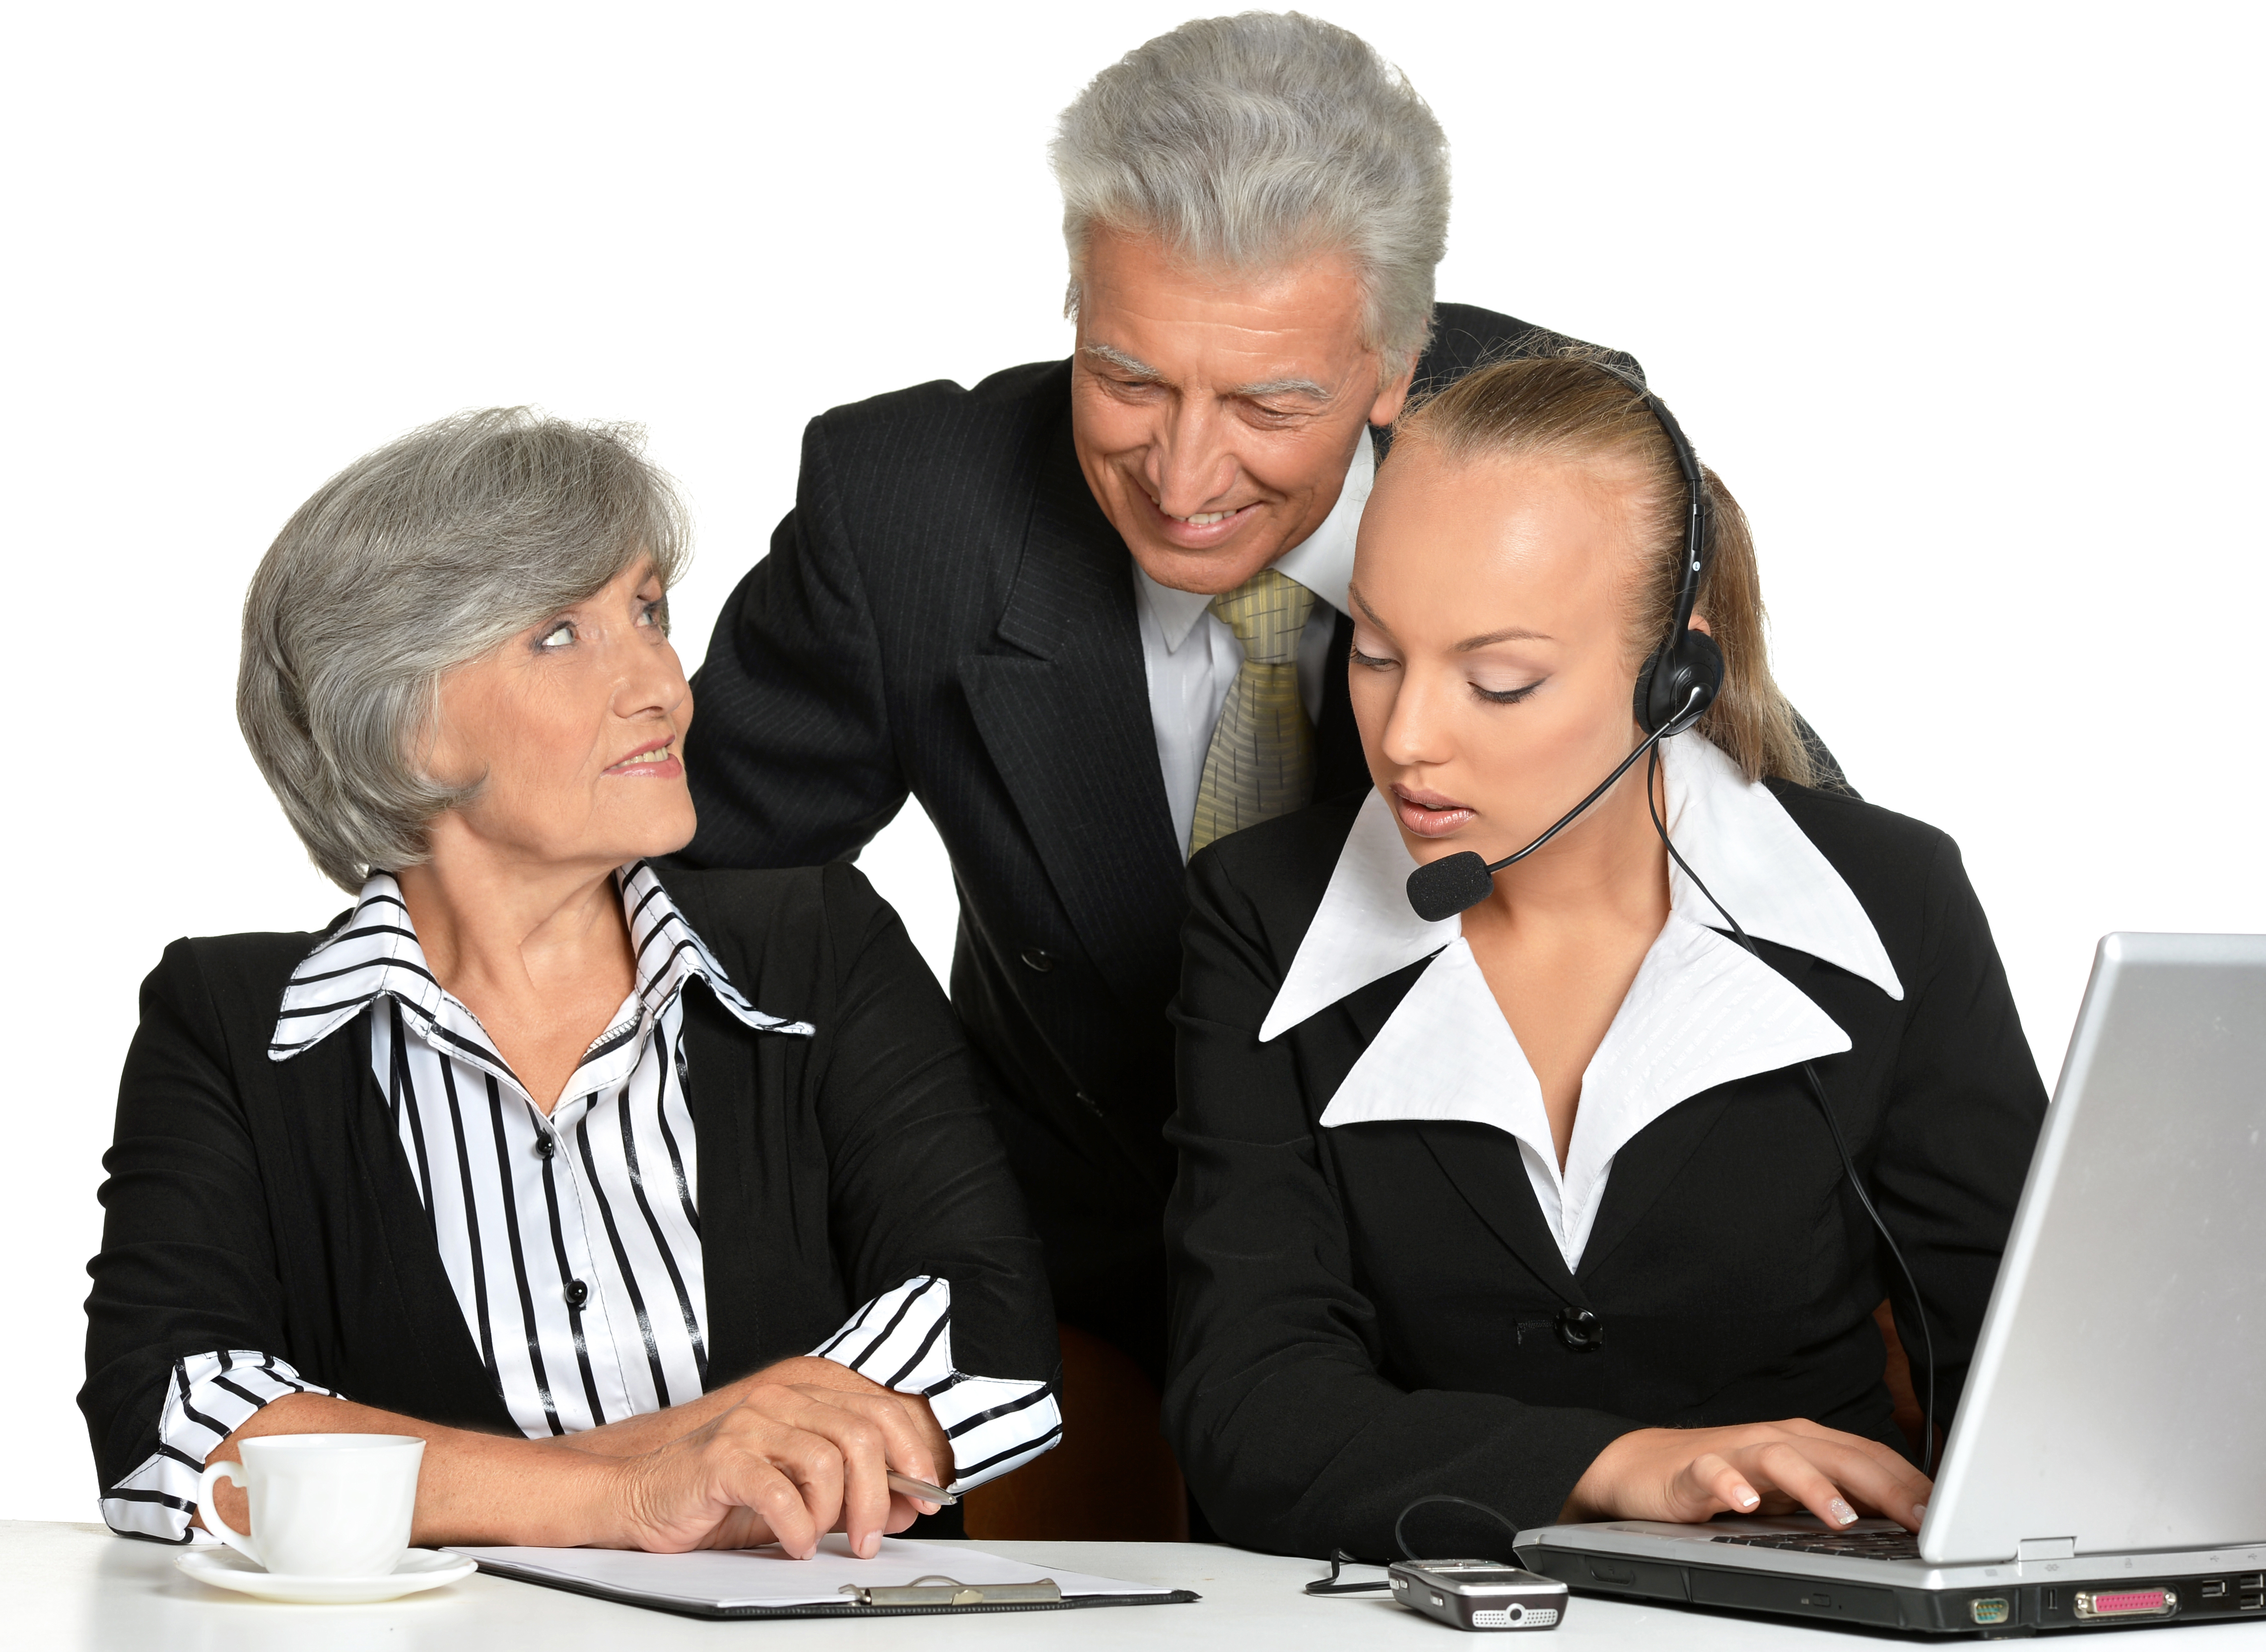 Image of three professionally dressed people working together at a computer helping each other